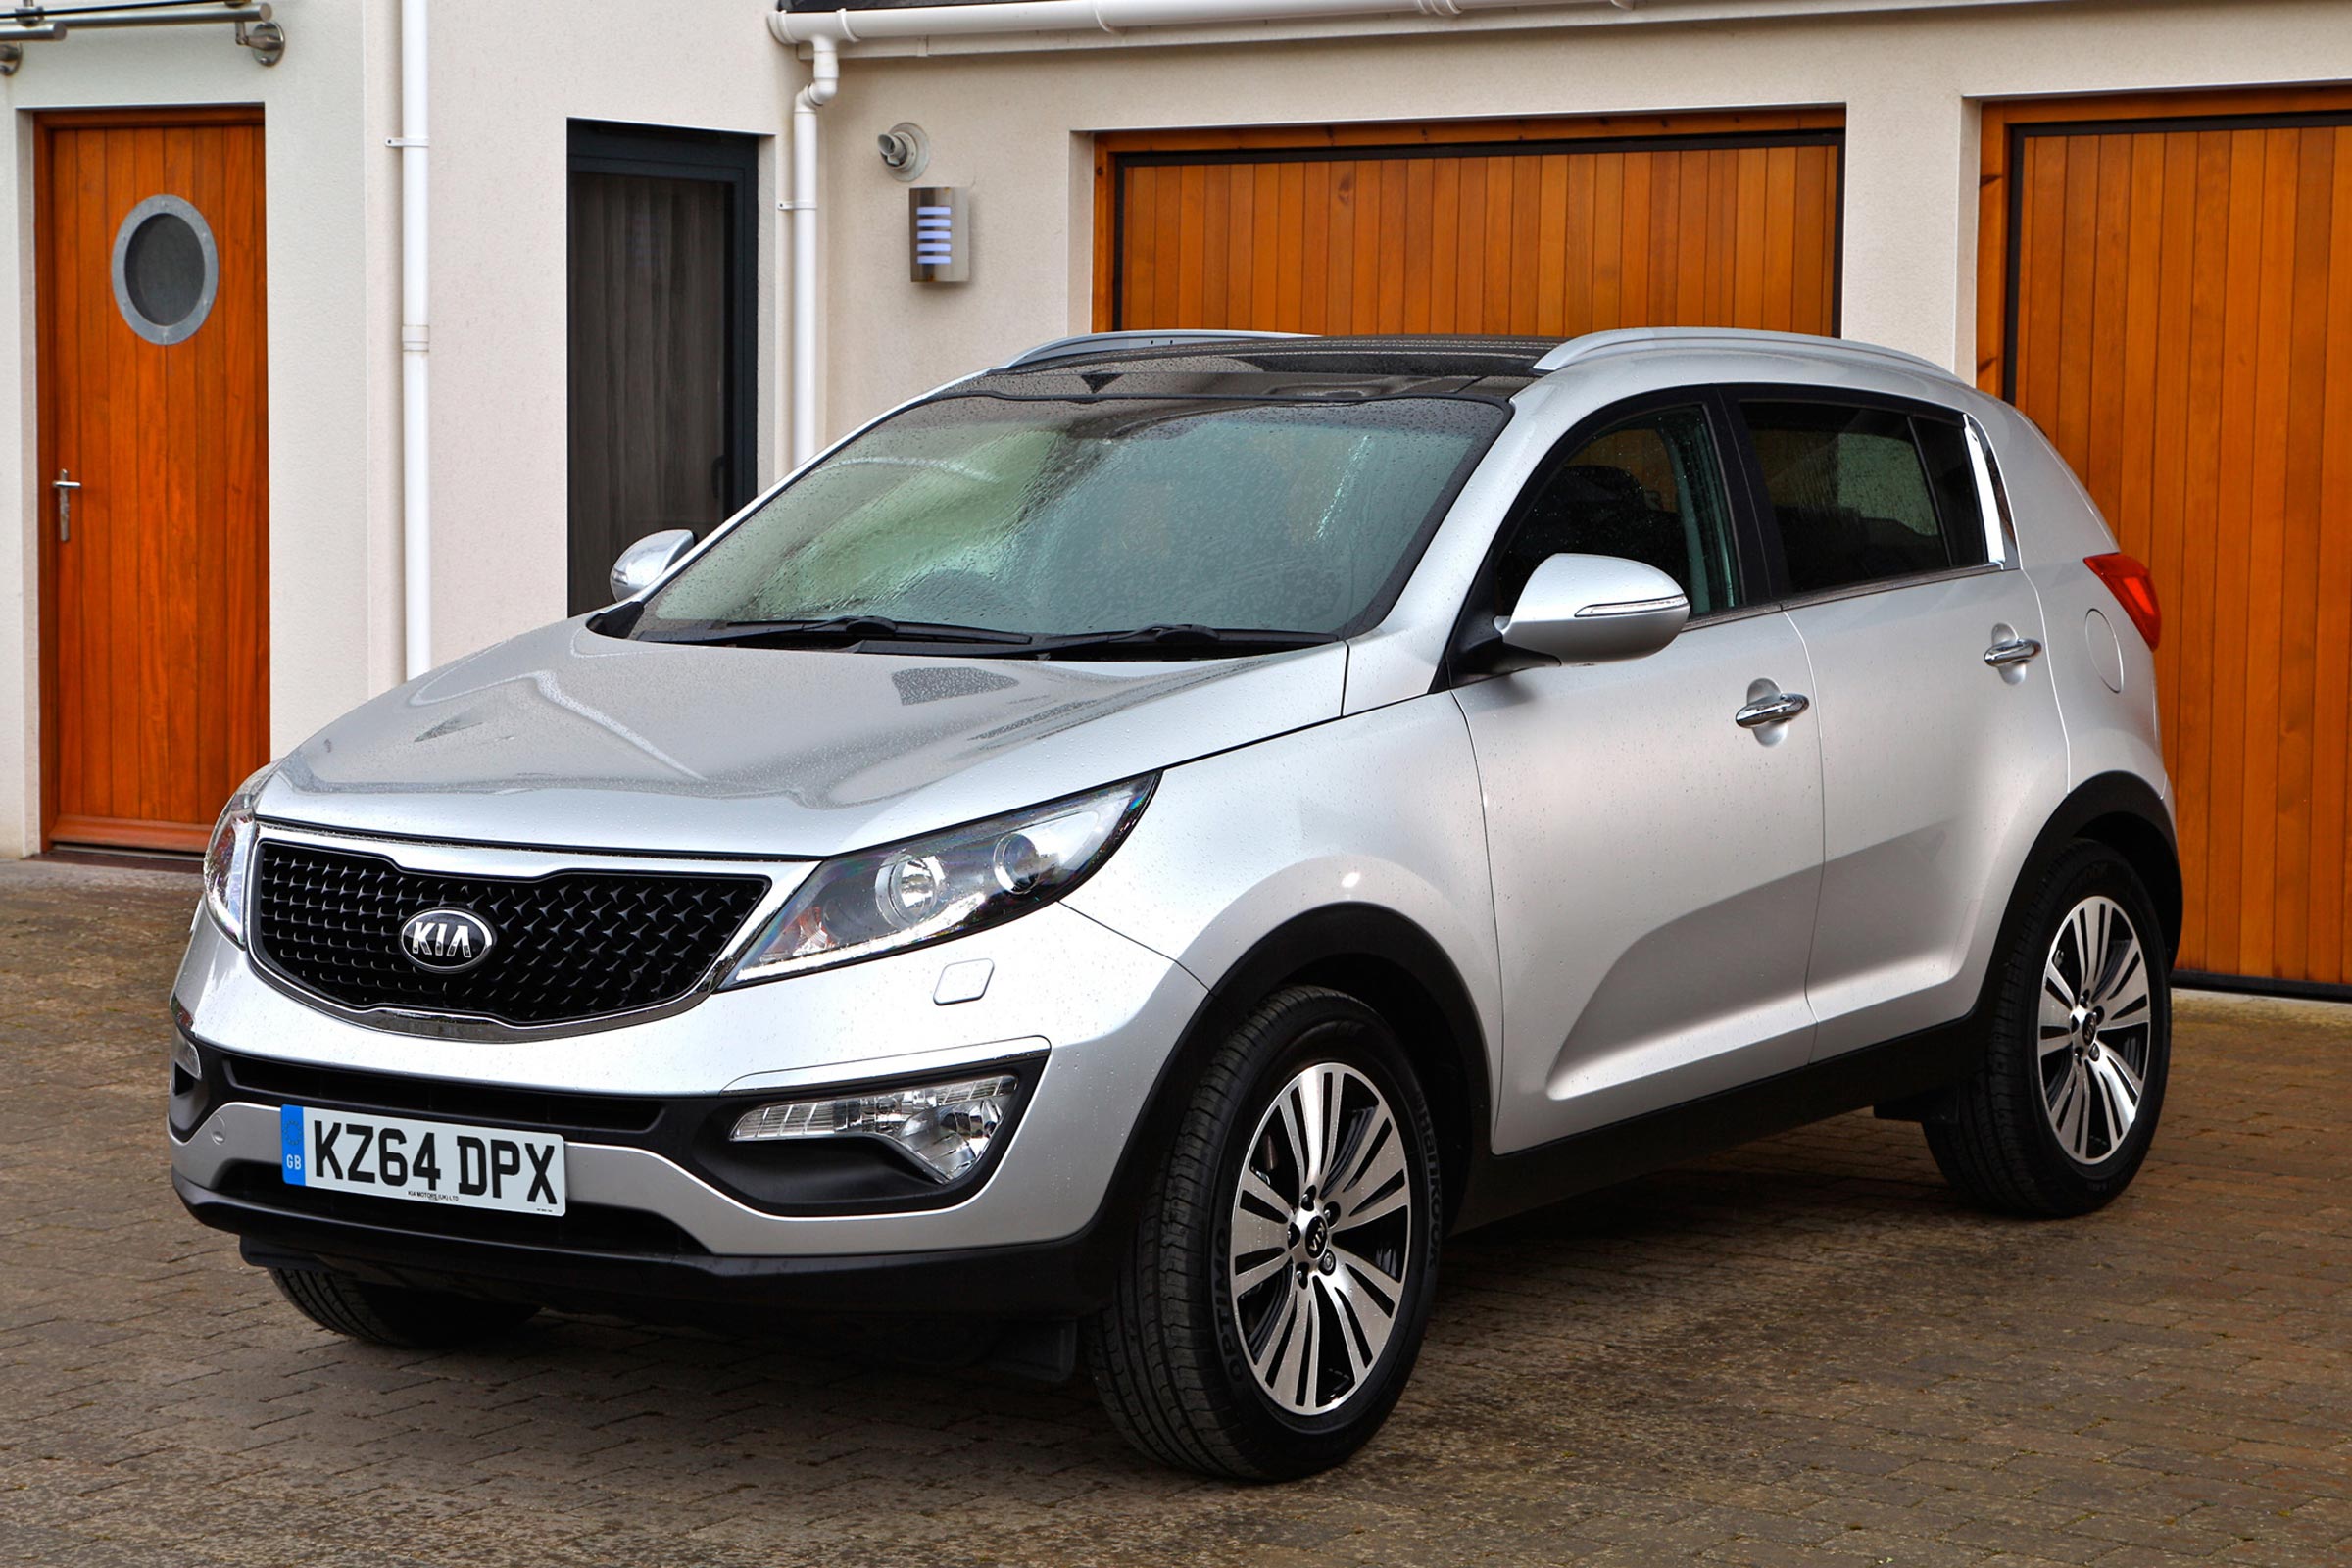 Used Kia Sportage buying guide 2010 2014 Mk3 Carbuyer